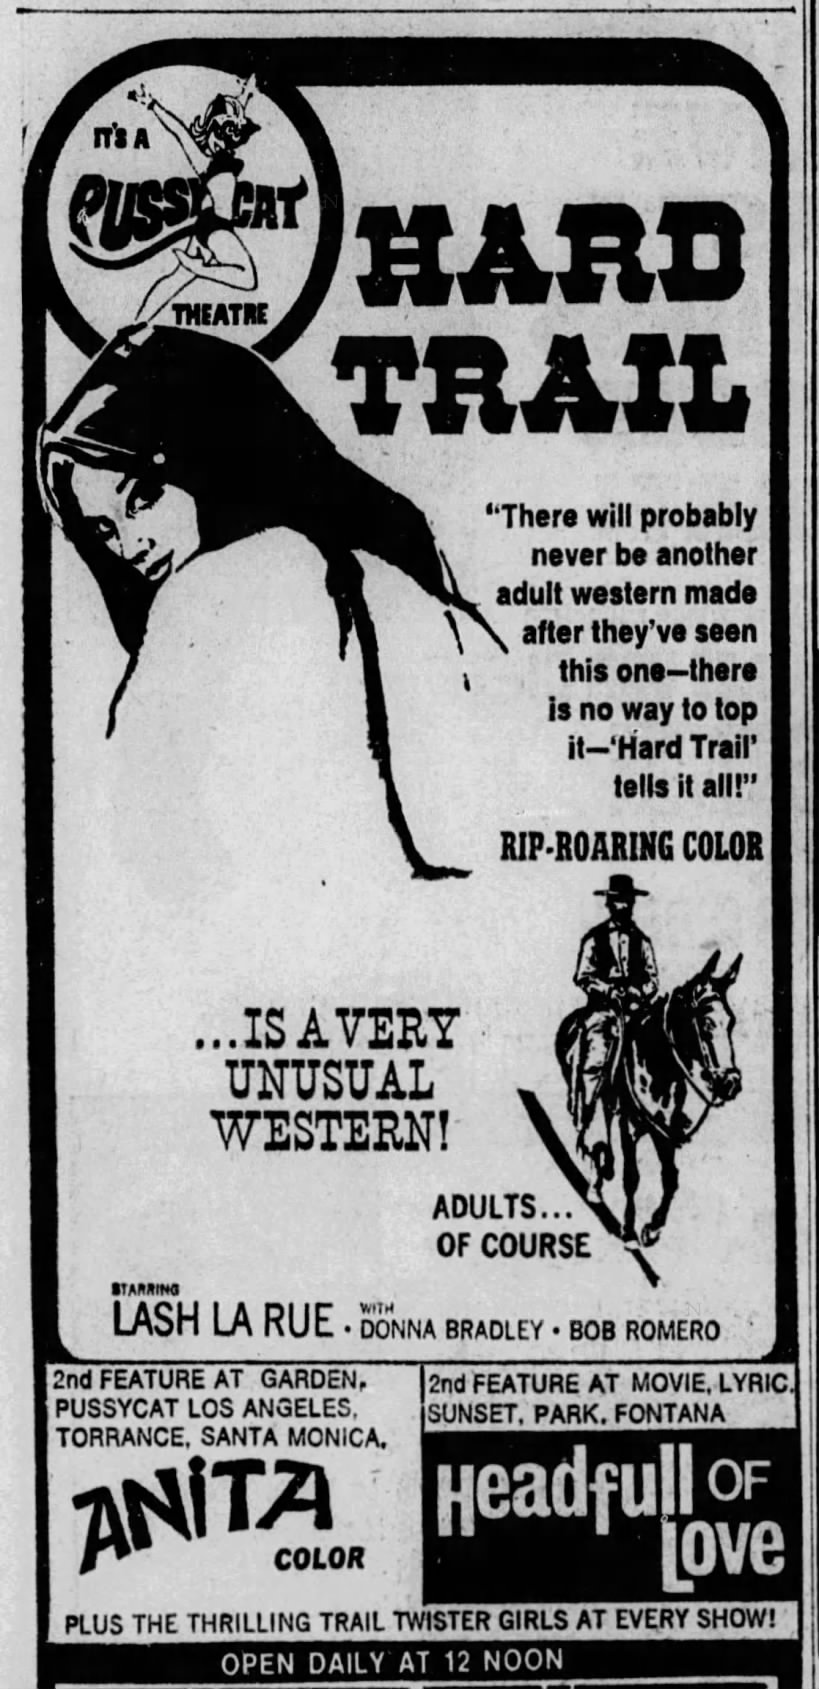 1970 ad for the movie "Hard Trail" at a Los Angeles adult theater. Starring Lash La Rue.